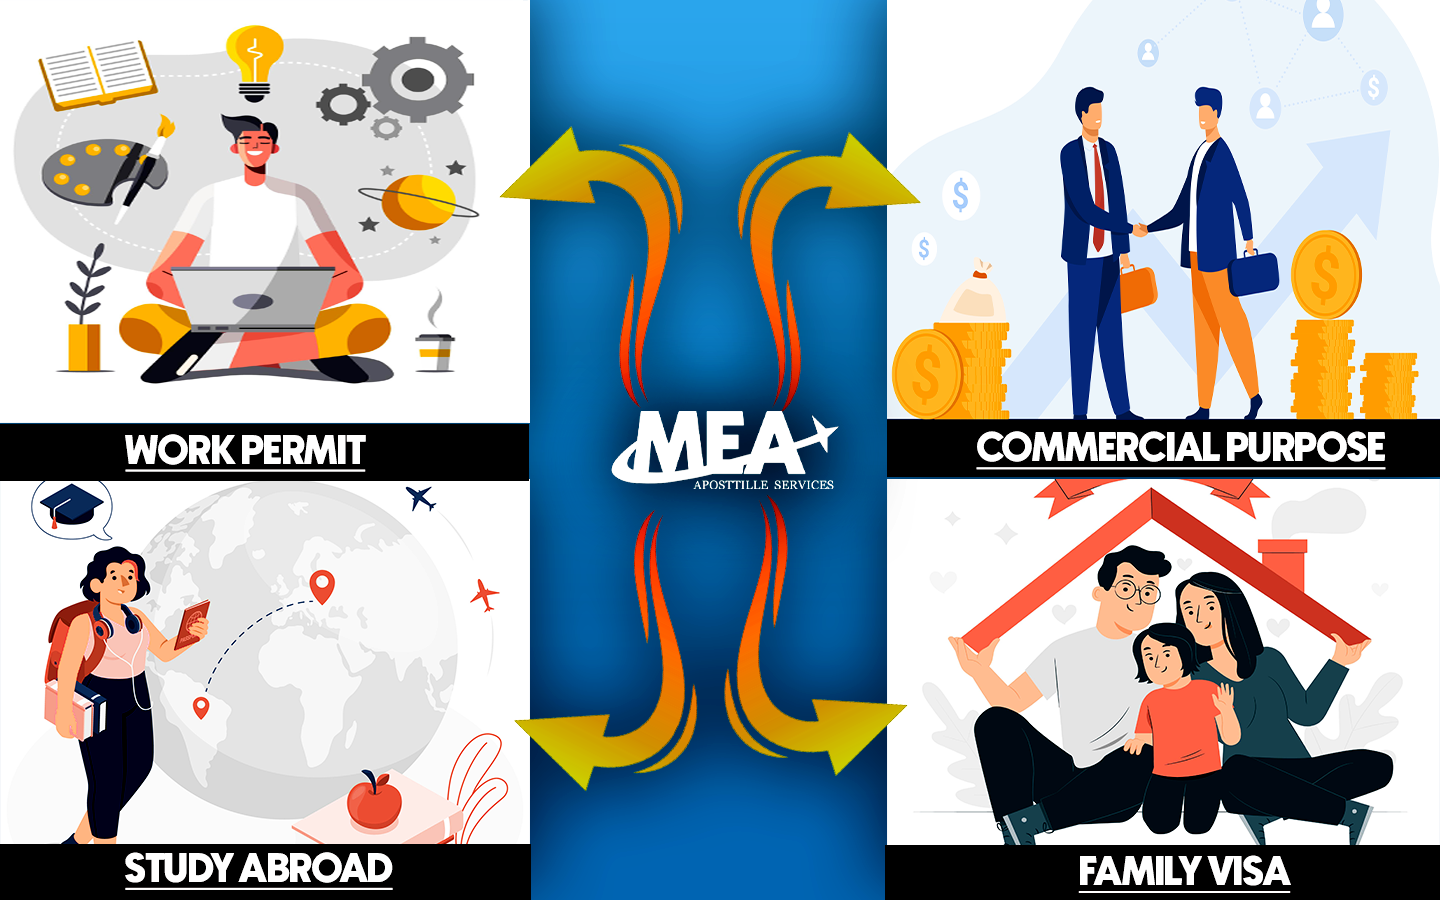 mea global services